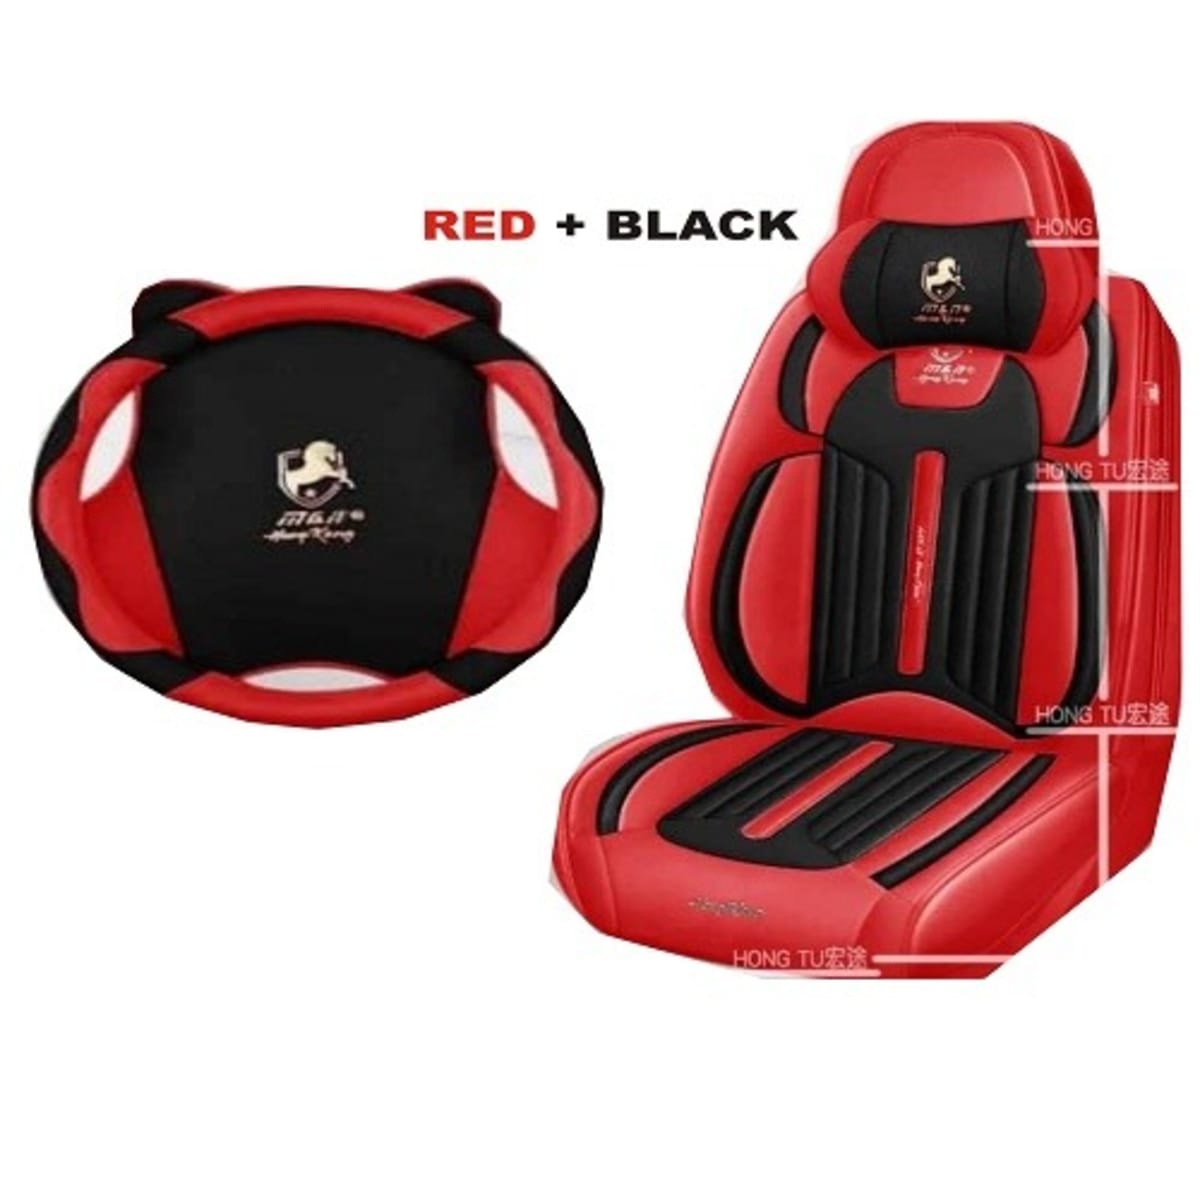 Leather Seat Cover Complete Set For 5seat Car - Suv